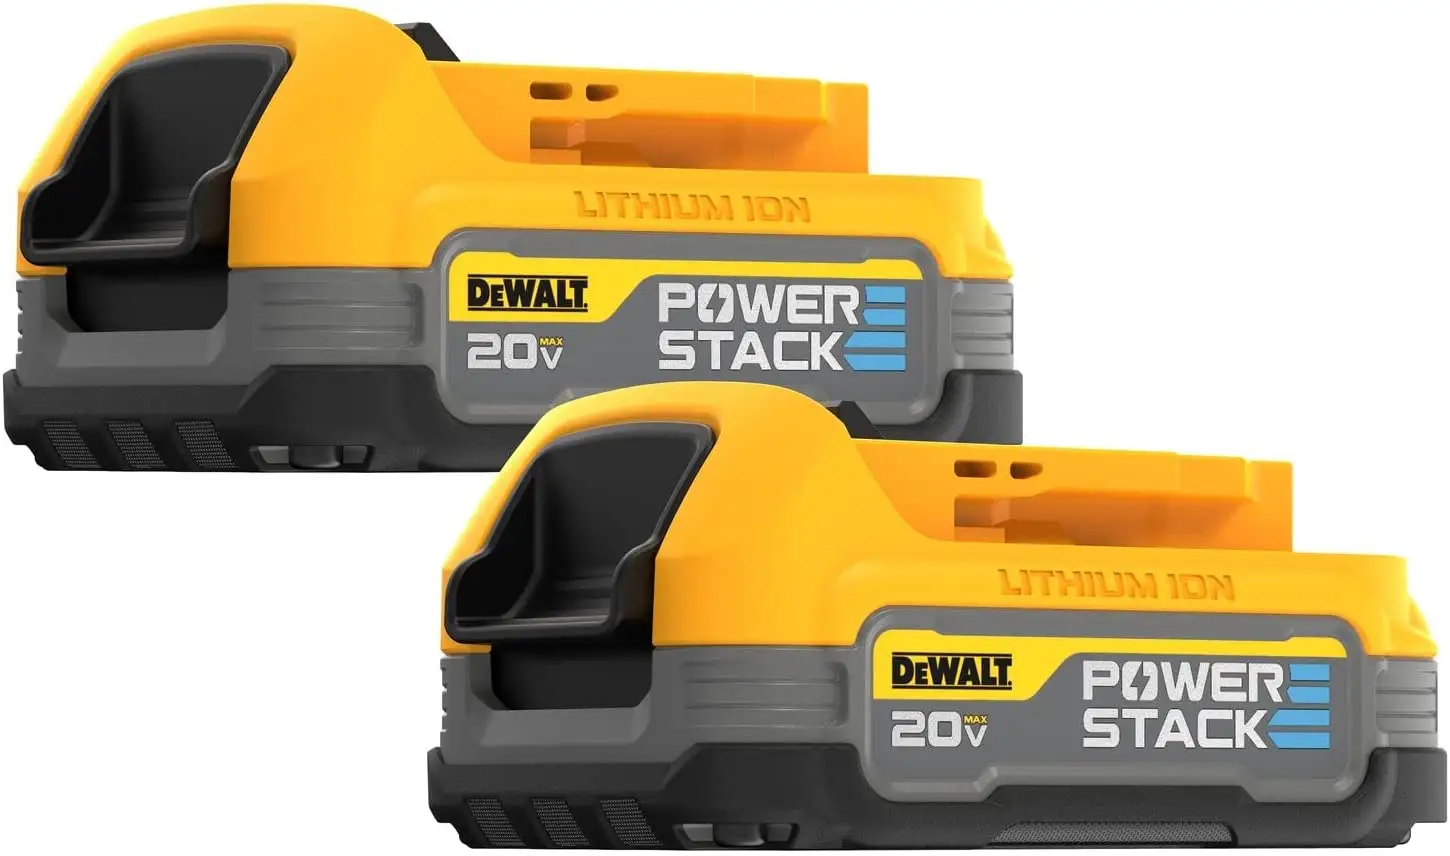 2-Pack Dewalt 20V MAX Powerstack Compact Li-Ion Battery + Choice of Bare Tool